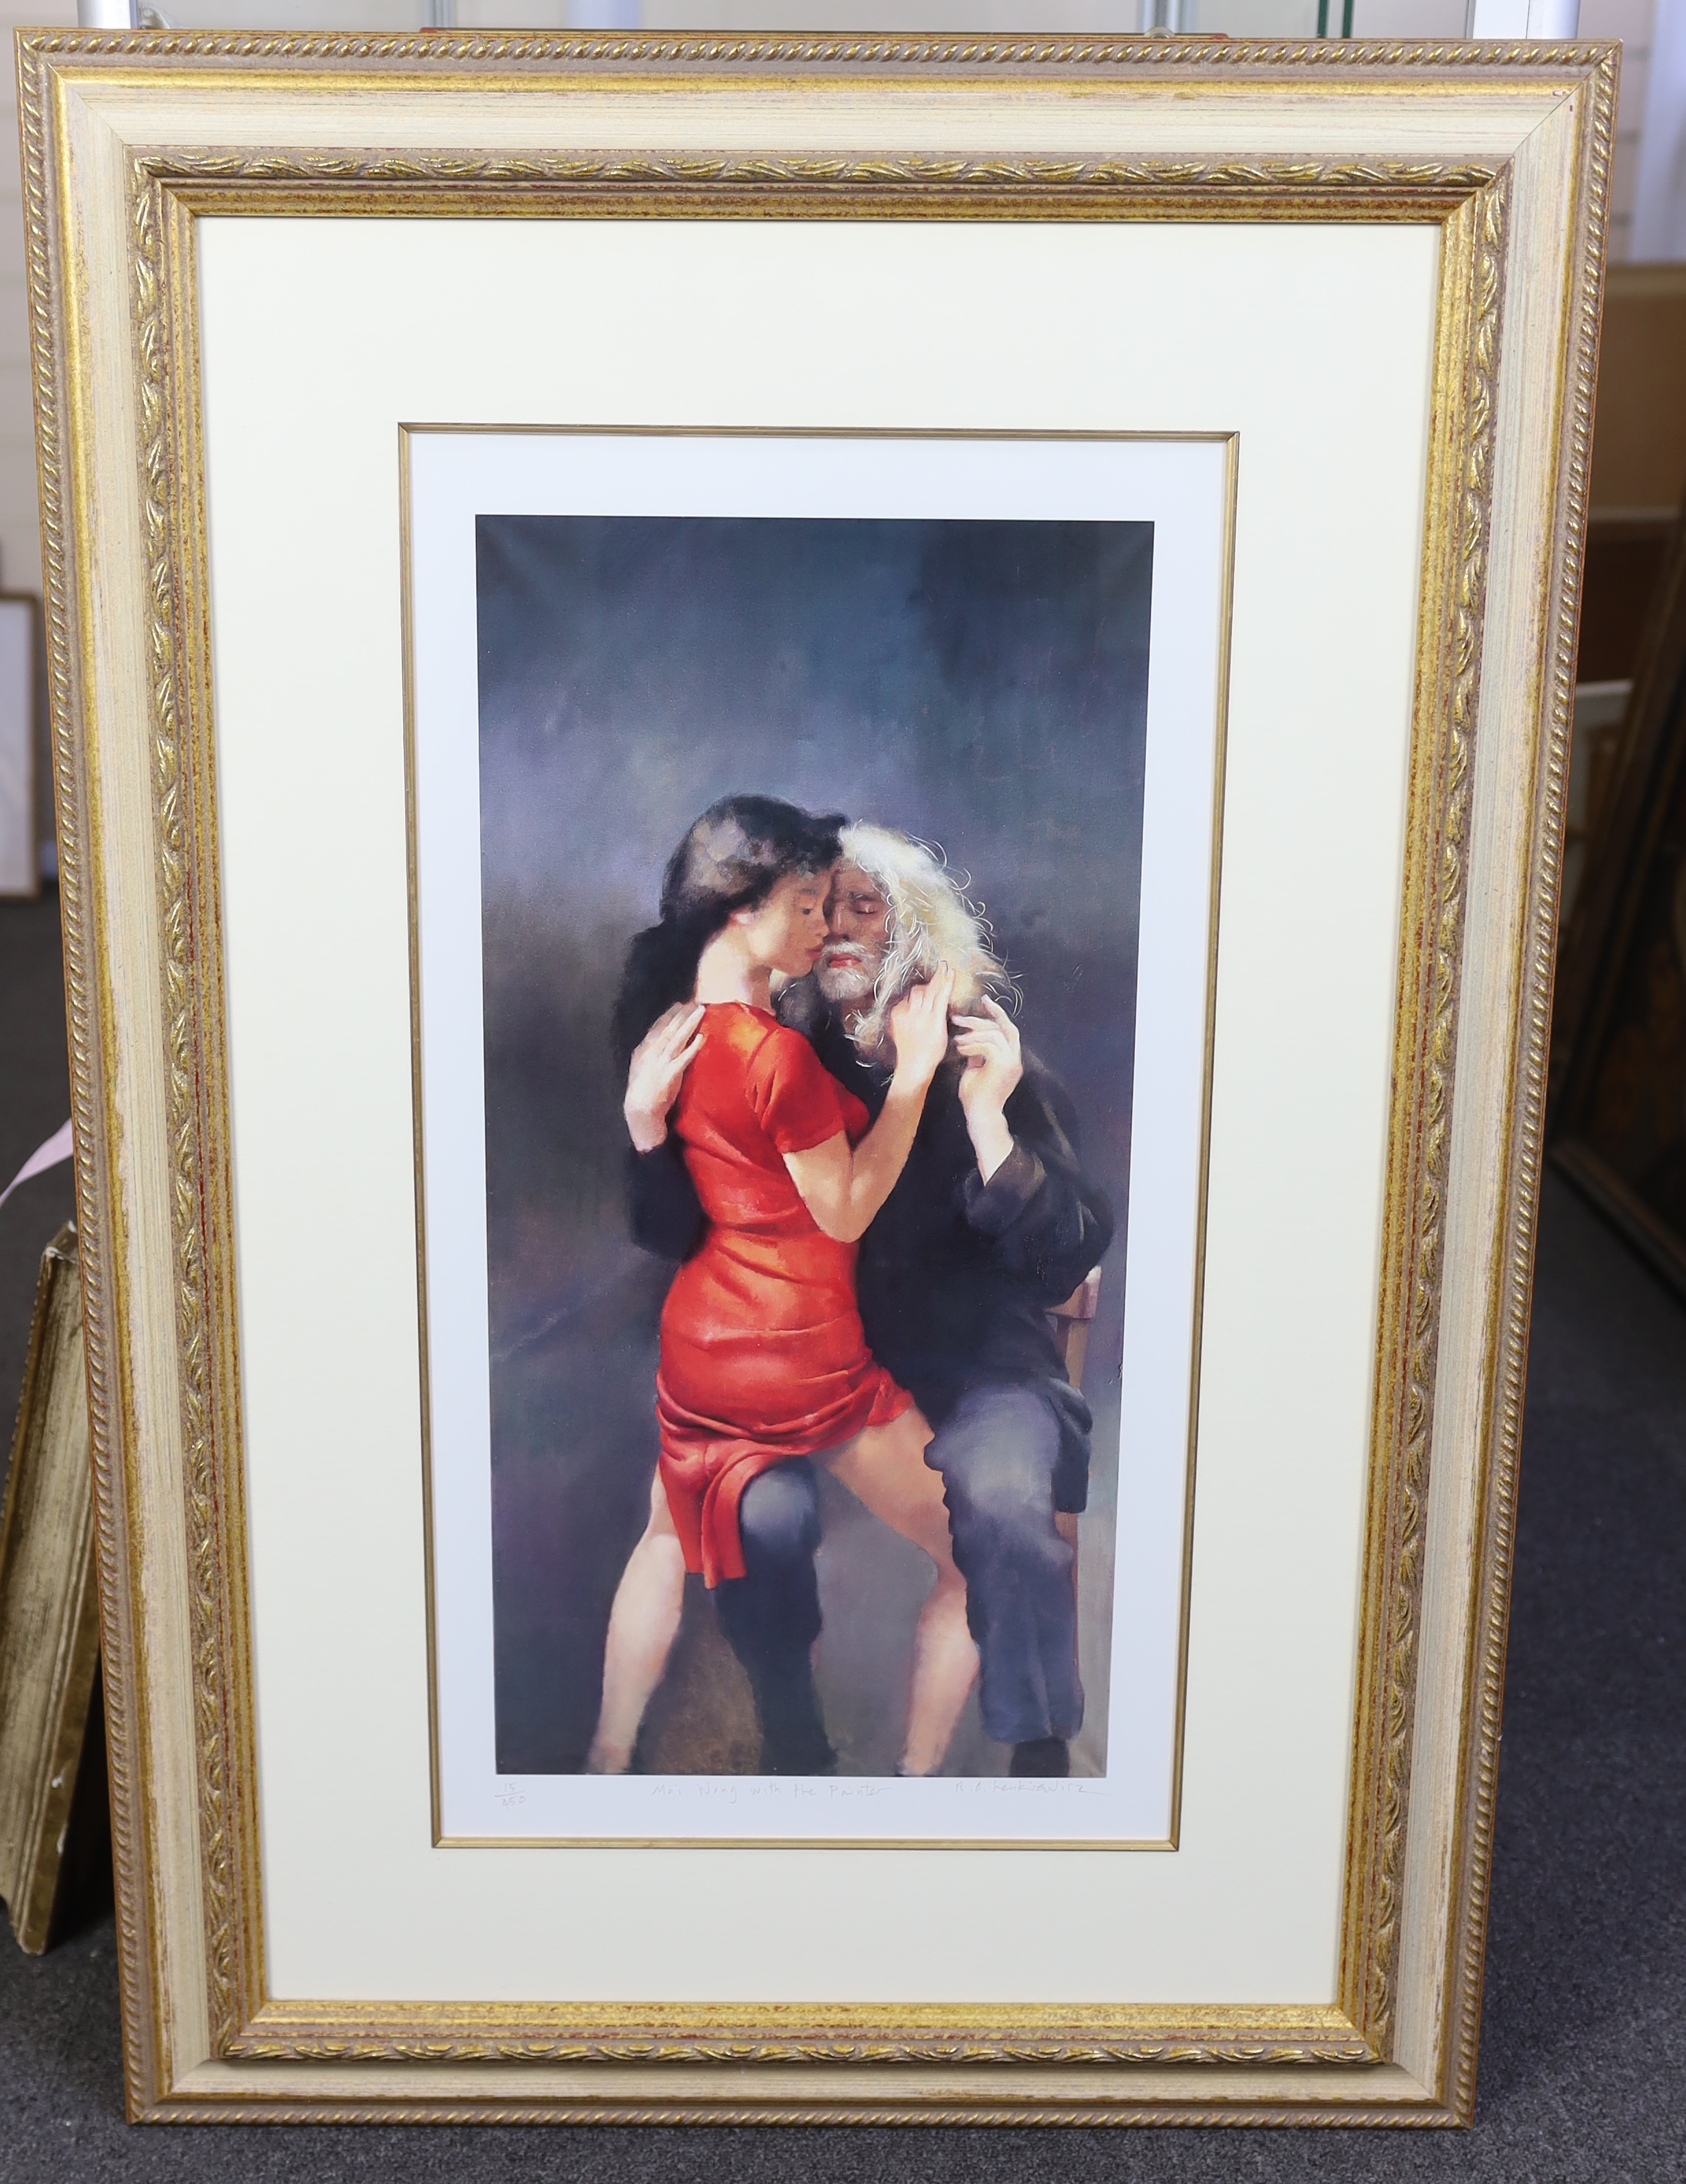 Robert Lenkiewicz (1941-2002), offset lithograph, 'The Painter with Moi', signed in pencil and titled 'Moi Wong with the painter', 5/450, 55 x 27cm. Condition - good